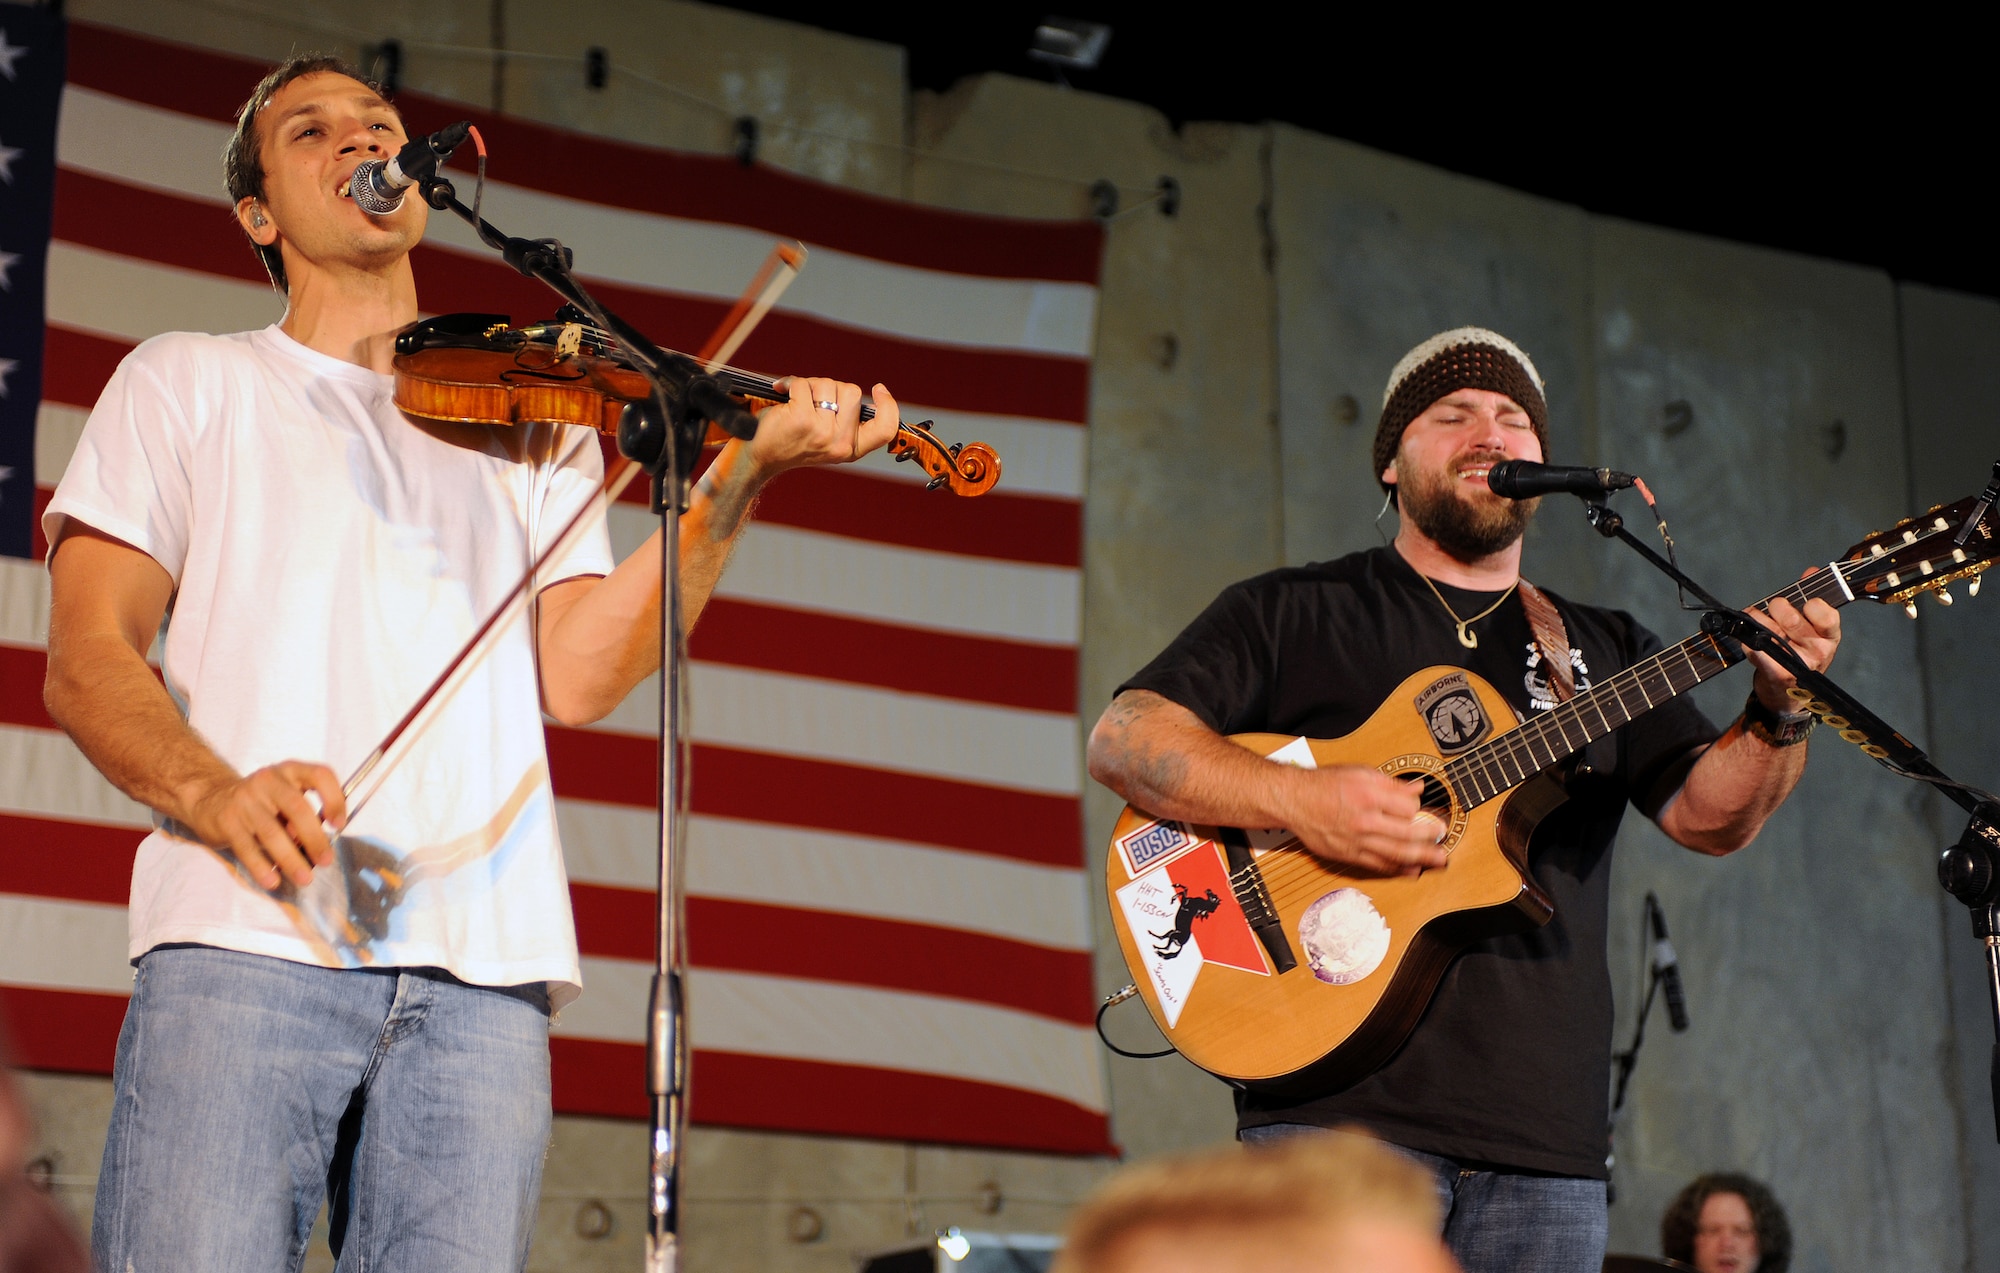 Zac Brown (right) and Jimmy De Martini, members of the Zac Brown band perform for a crowd of deployed personnel at Holt Stadium at Joint Base Balad, Iraq, April 18, 2010. The Grammy-nominated band is touring various bases throughout Southwest Asia to perform for the troops rather than attend this year's Academy of Country Music Awards for which they were nominated for several awards. (U.S. Air Force photo by Master Sgt. Linda C. Miller/Released)